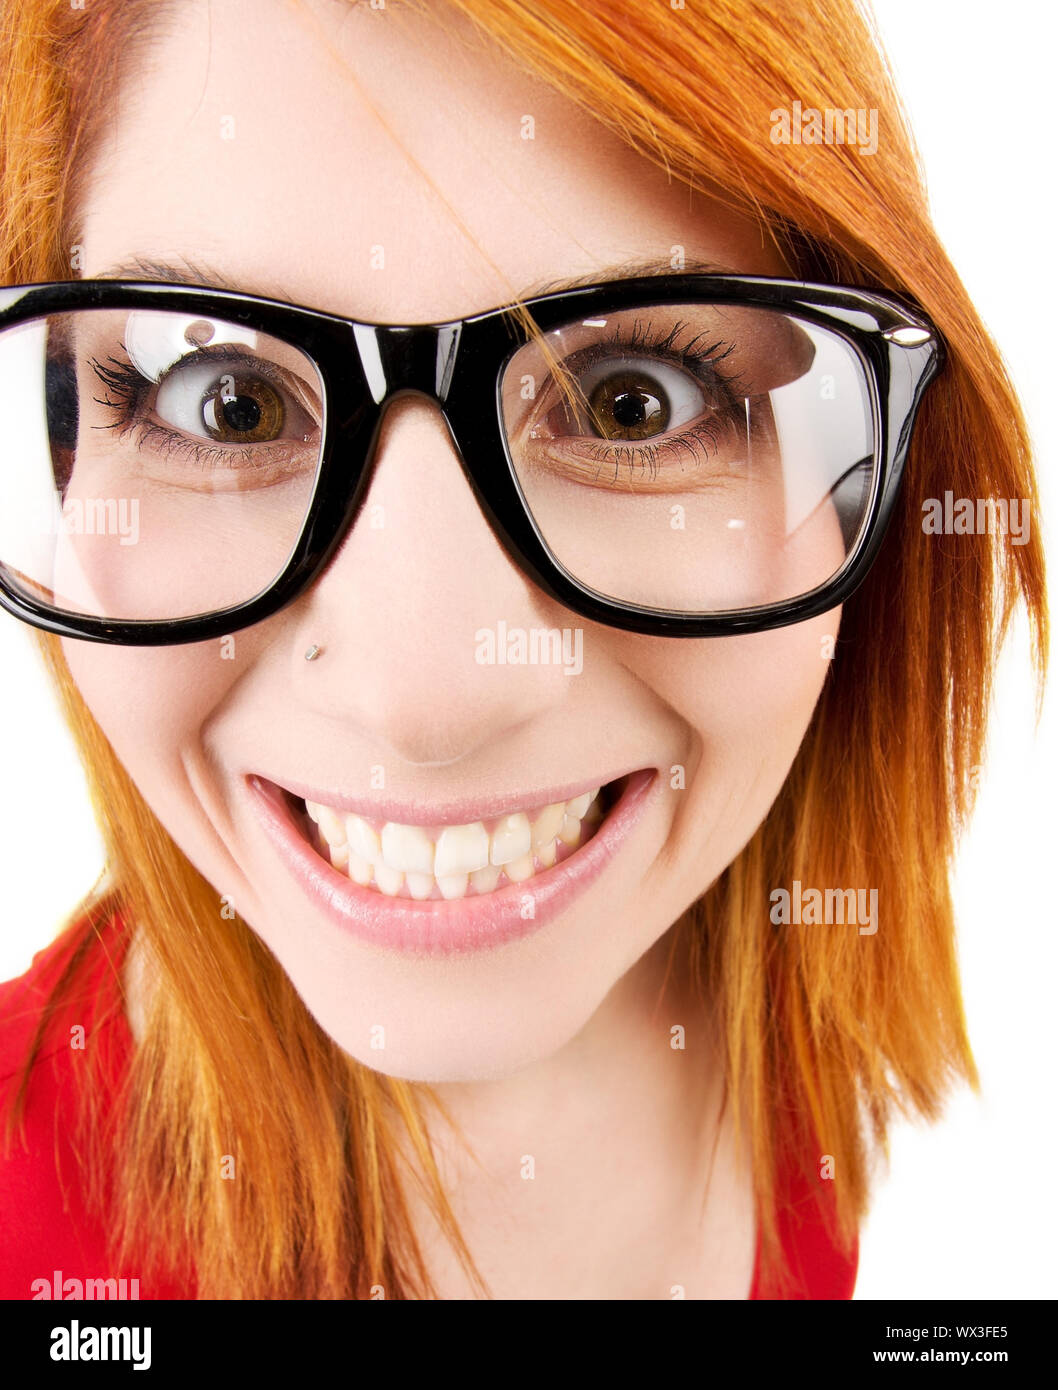 wideangle distorted picture of funny female face Stock Photo